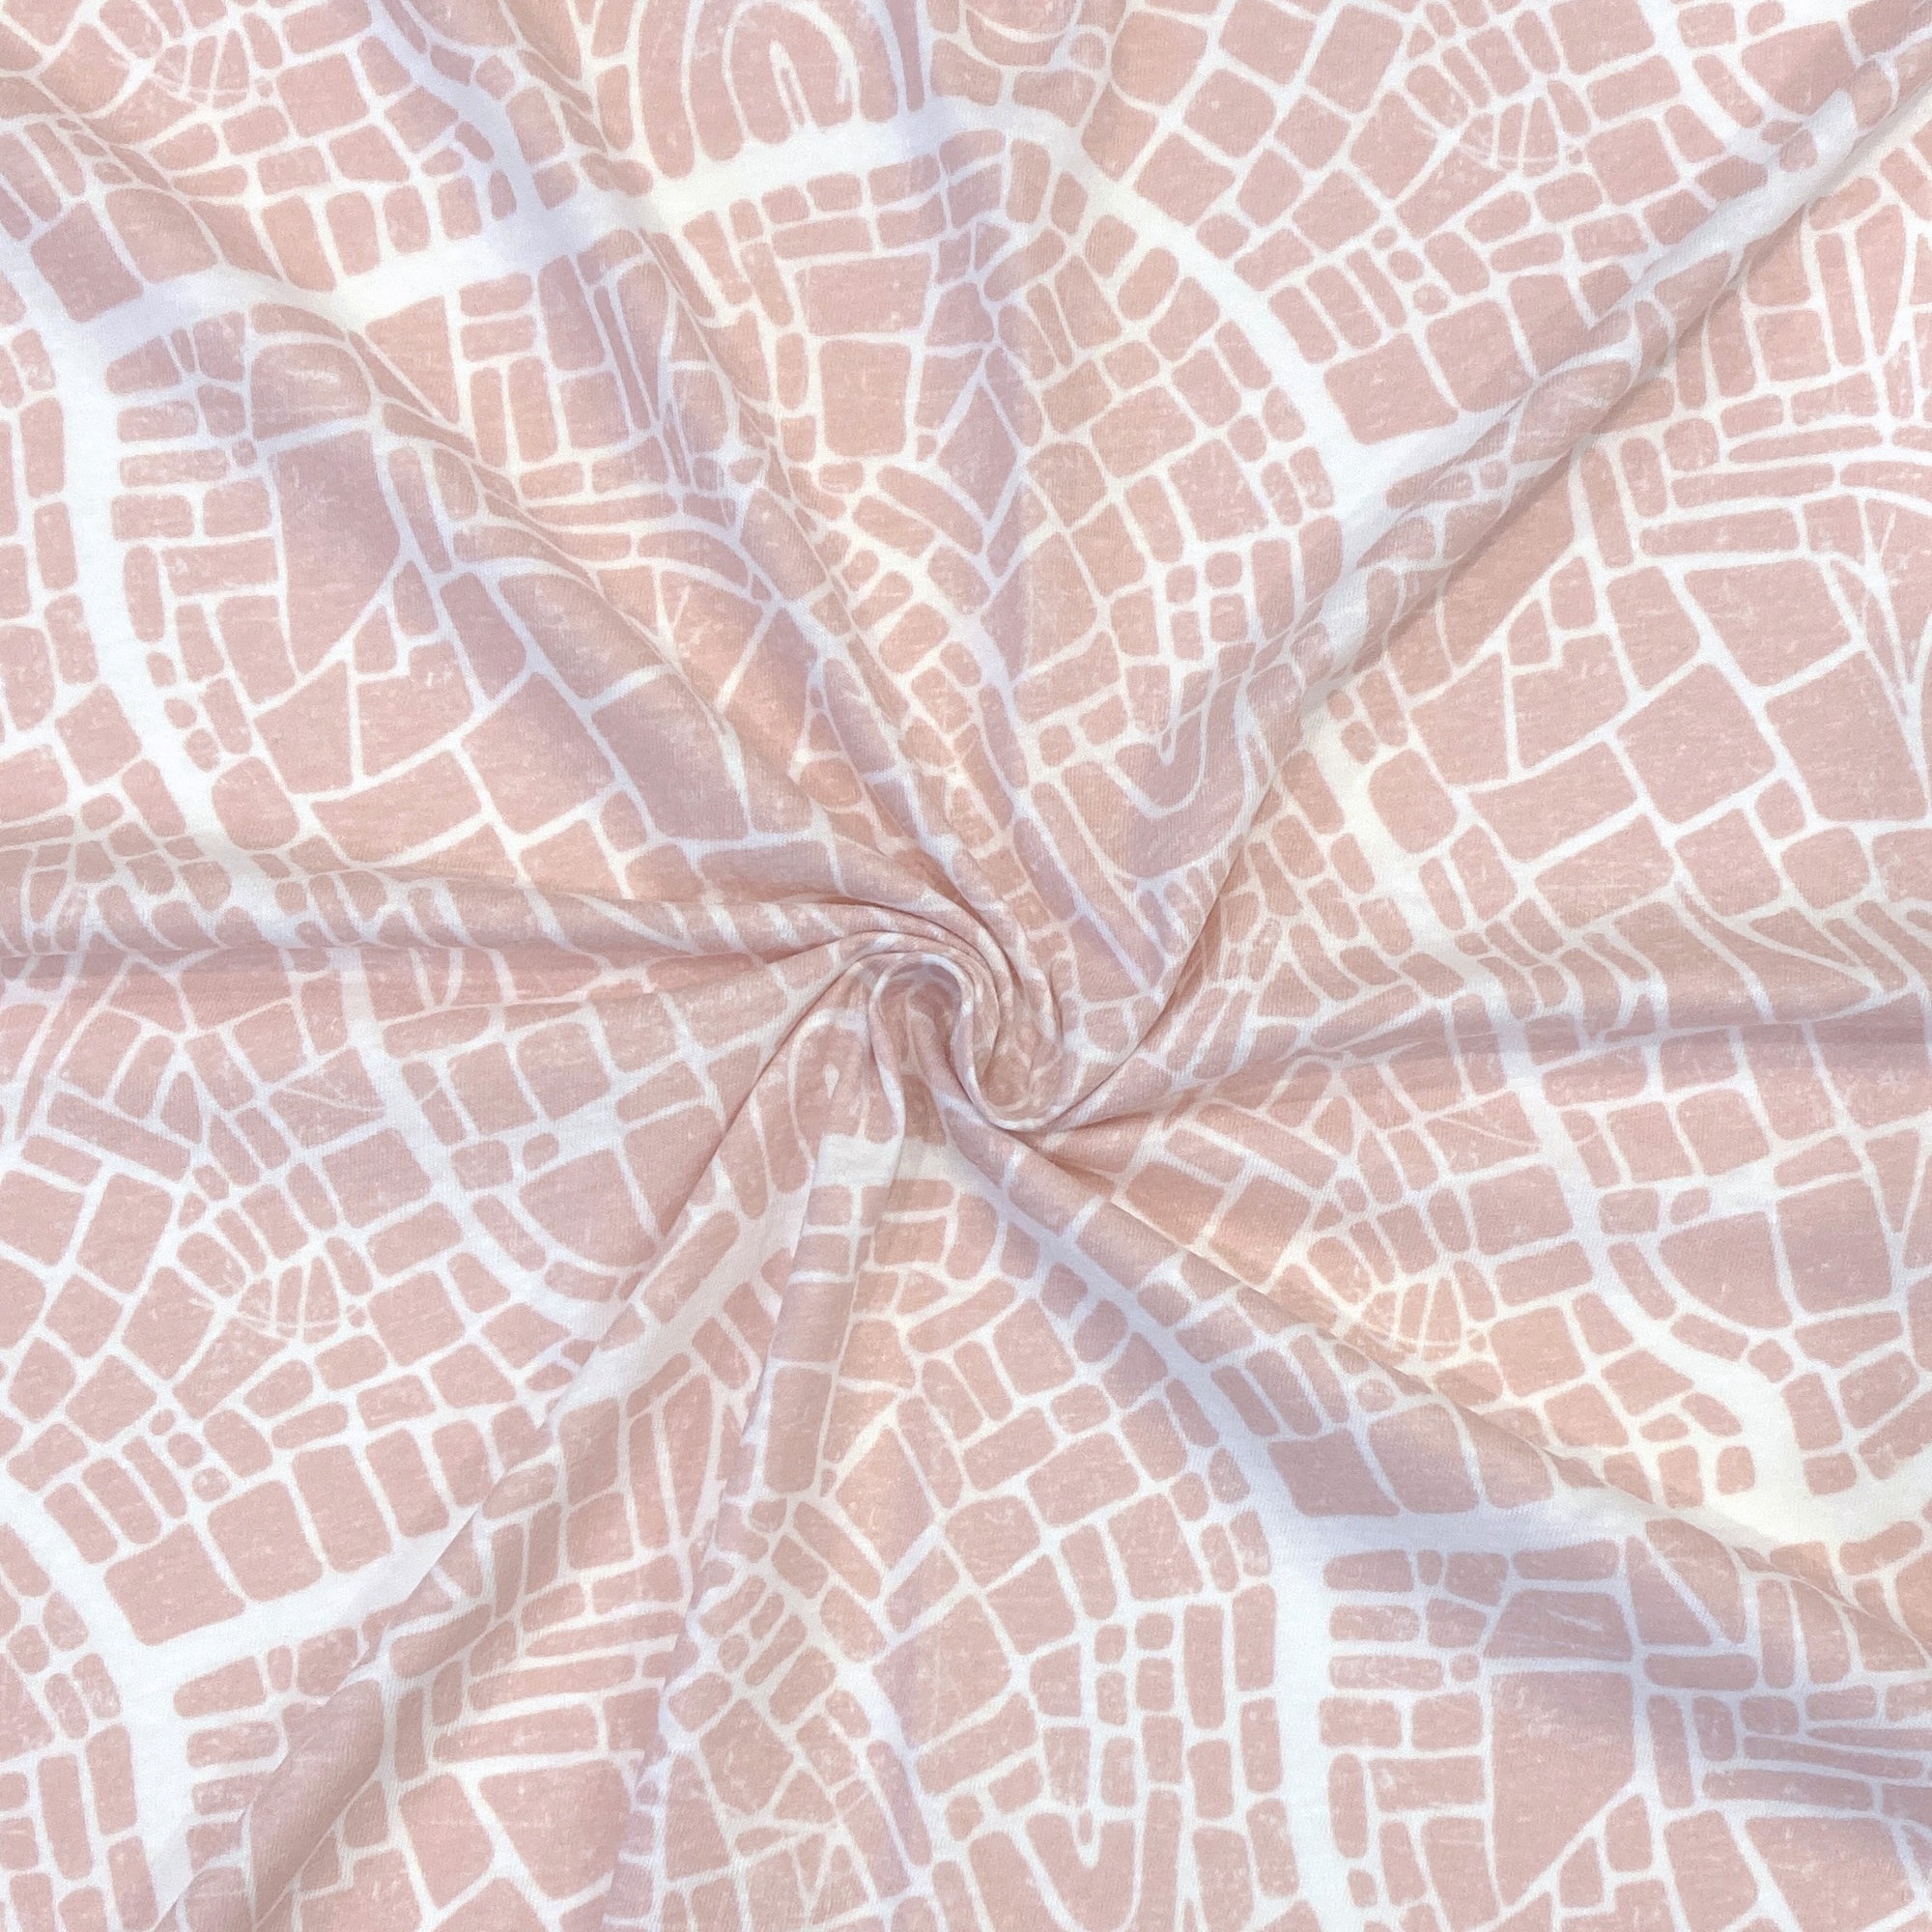 Blush and White Abstract Grunge Map Tri-Blend Jersey Knit Fabric, By Brittney Laidlaw for CLUB Fabrics Fabric, Raspberry Creek Fabrics